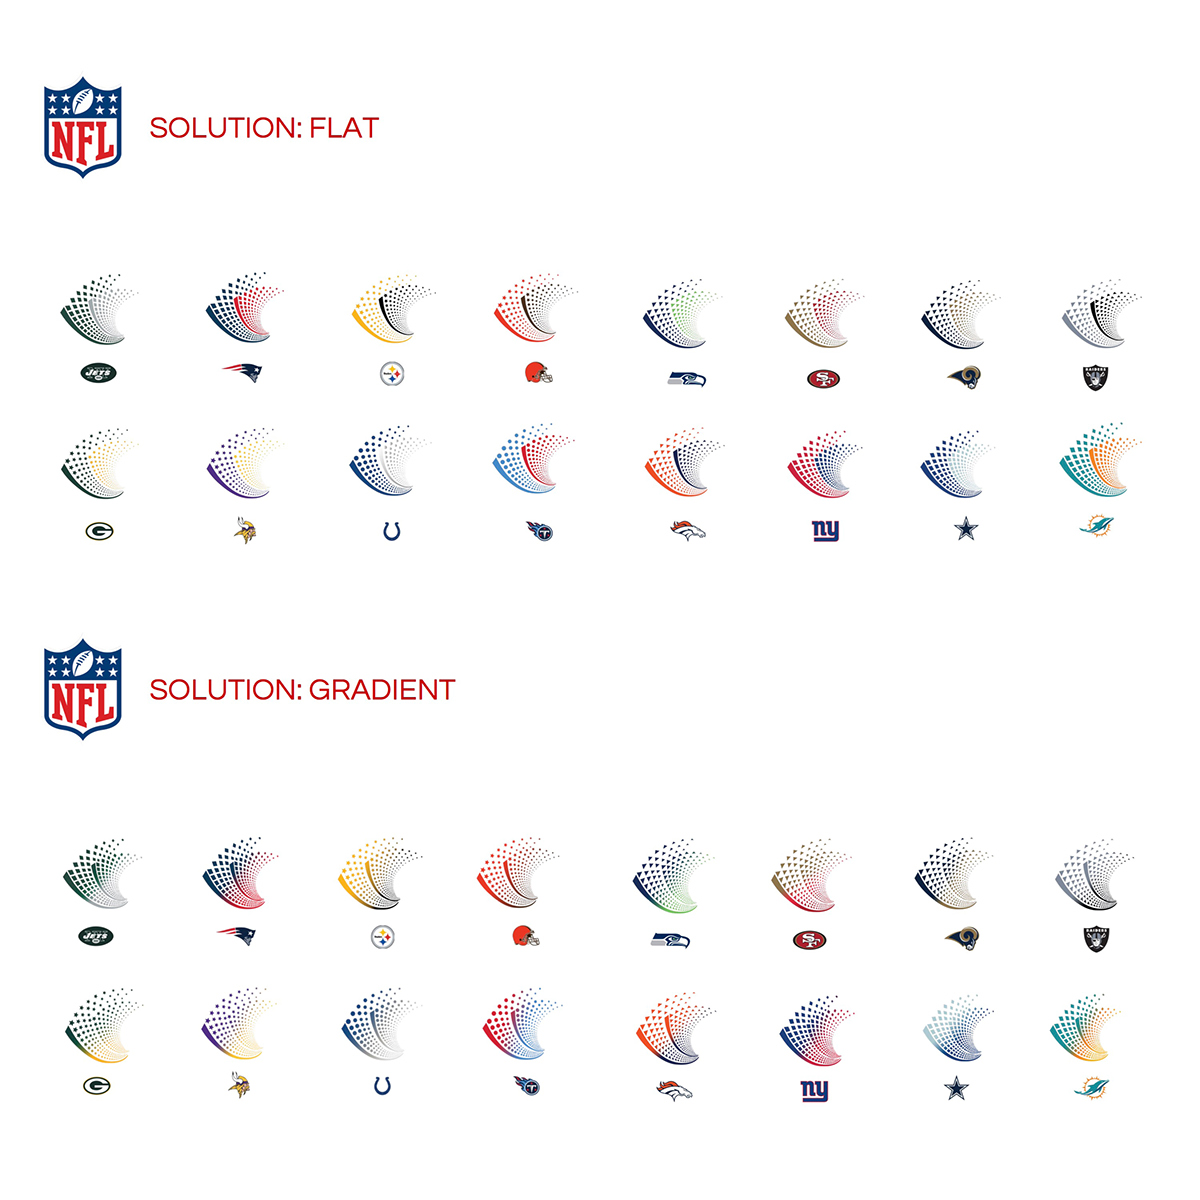 nfl NFLxFIT visual design system graphic sports football contest creative